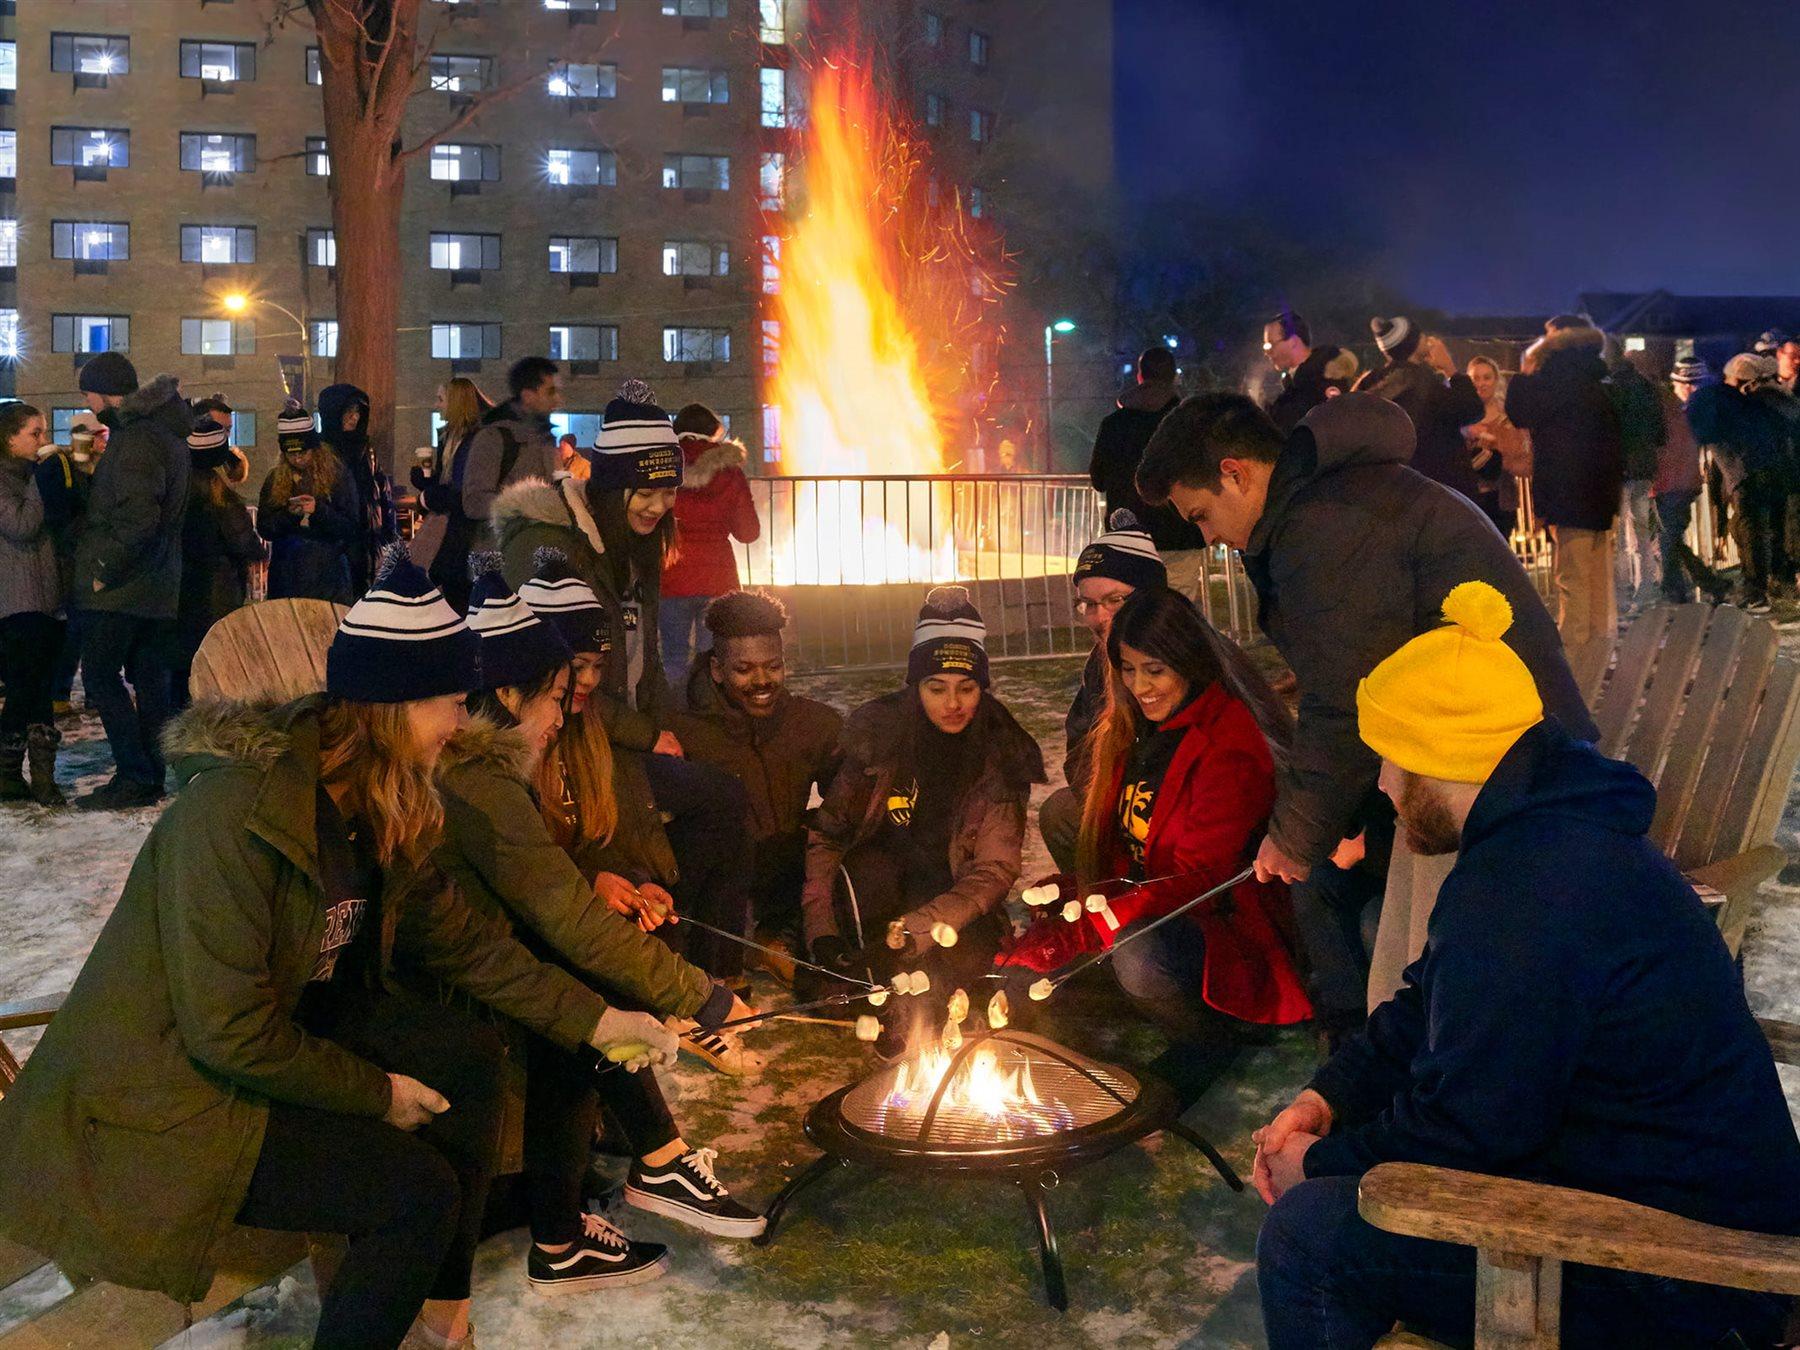 Students sitting and roasting marshmallows over a fire, while other students stand and talk together on a snow-covered lawn